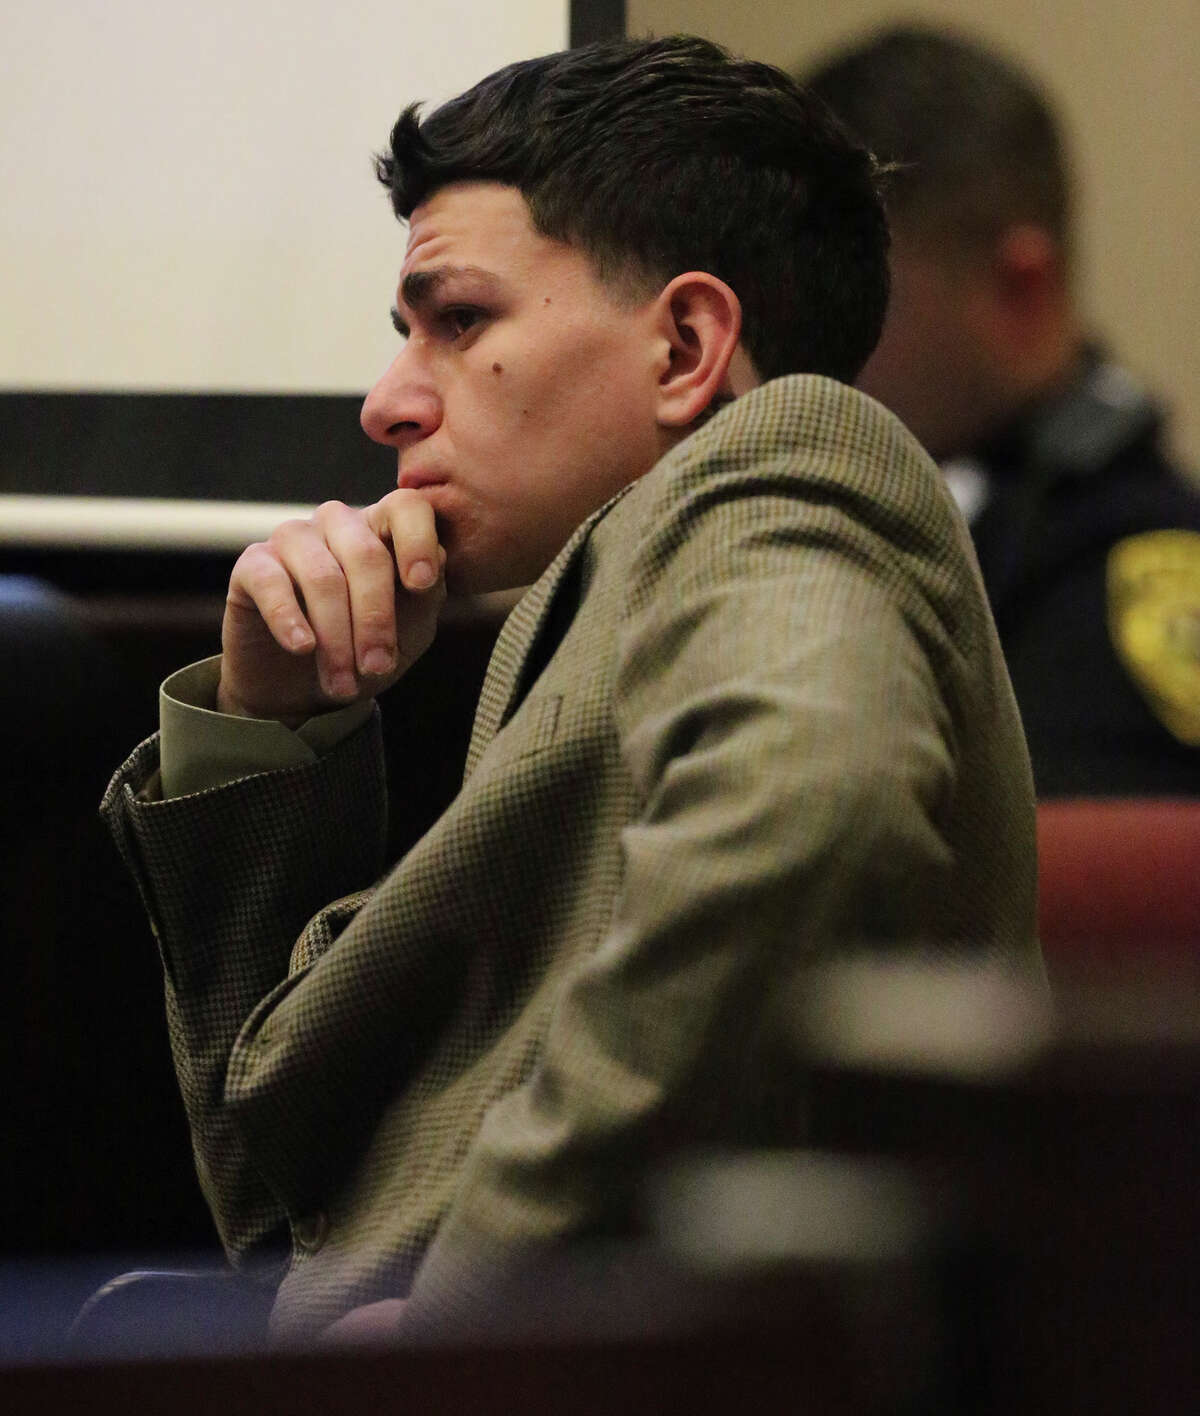 Dustin Lee Osborne sits in the 186th District Court Tuesday January 31, 2017. Osborne is accused in the 2014 murder of Ralph Micahel Lopez,34, when Lopez intervened in an argument.